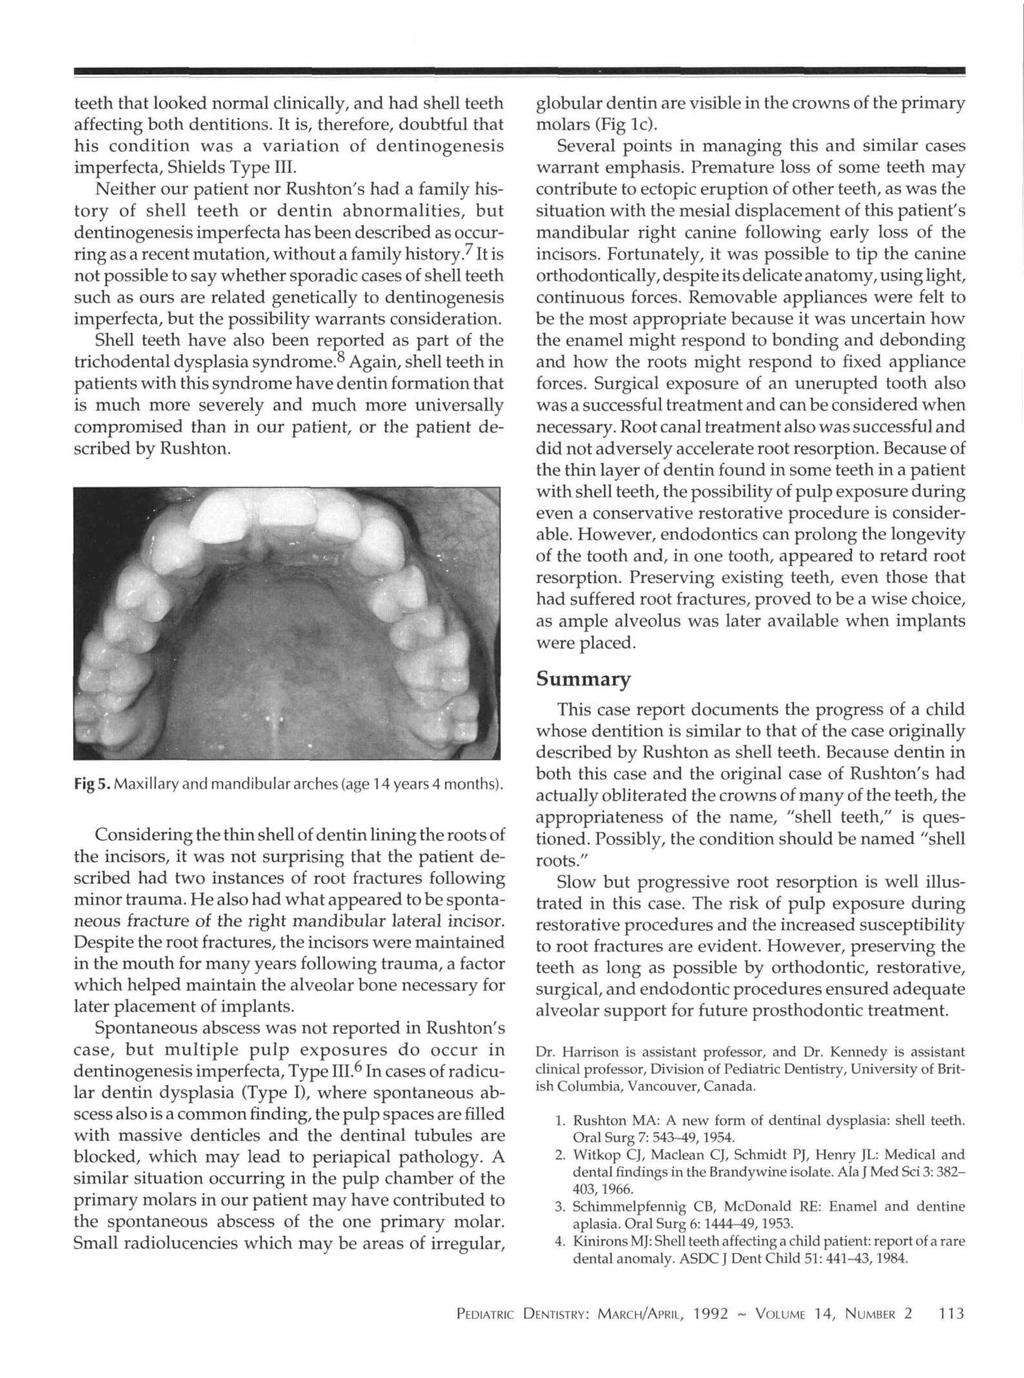 teeth that looked normal clinically, and had shell teeth affecting both dentitions. It is, therefore, doubtful that his condition was a variation of dentinogenesis imperfecta, Shields Type III.